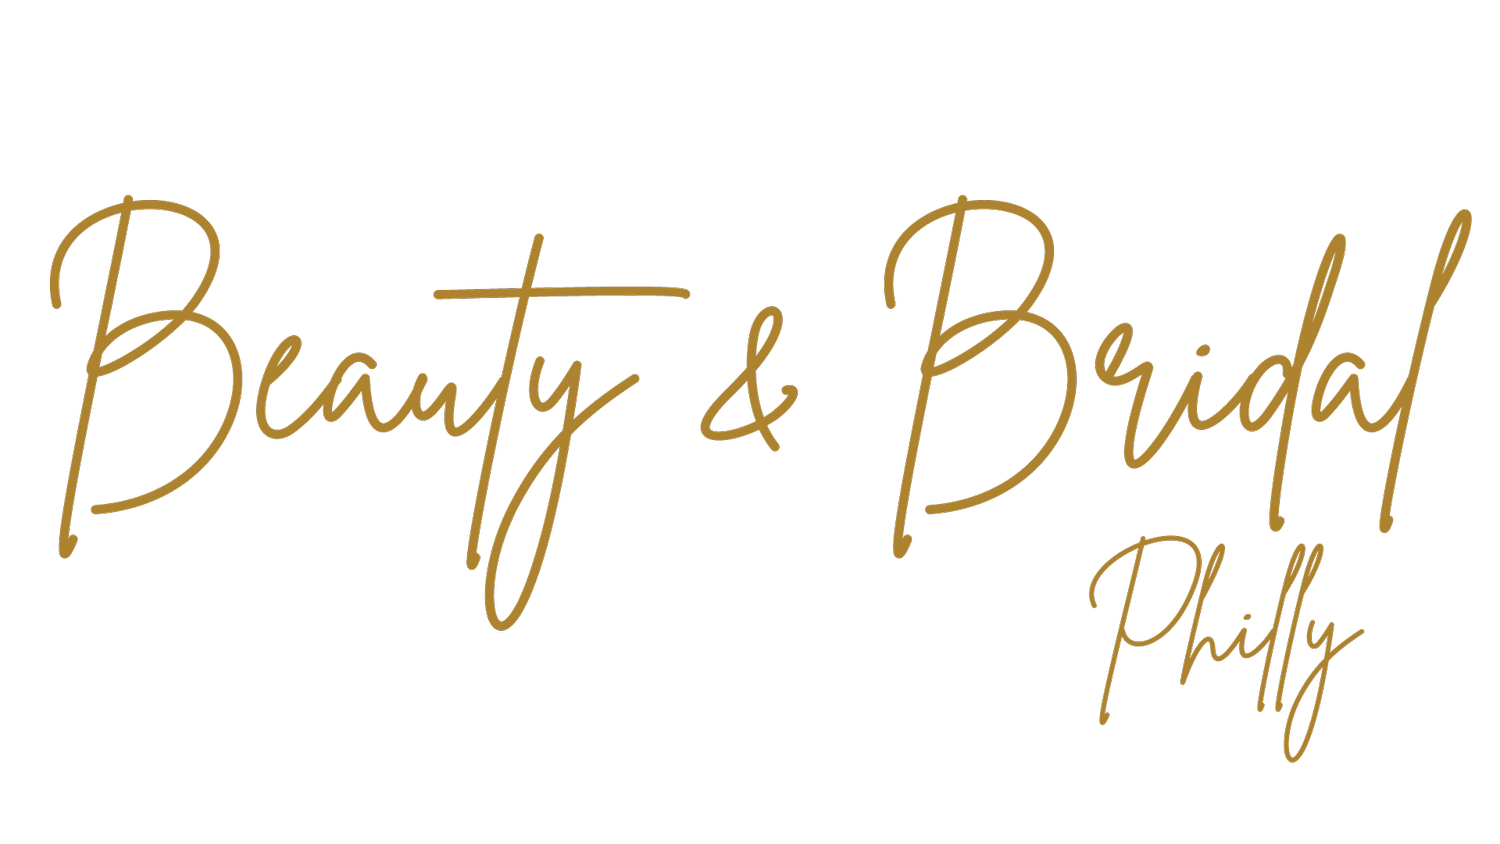 Beauty &amp; Bridal Philly